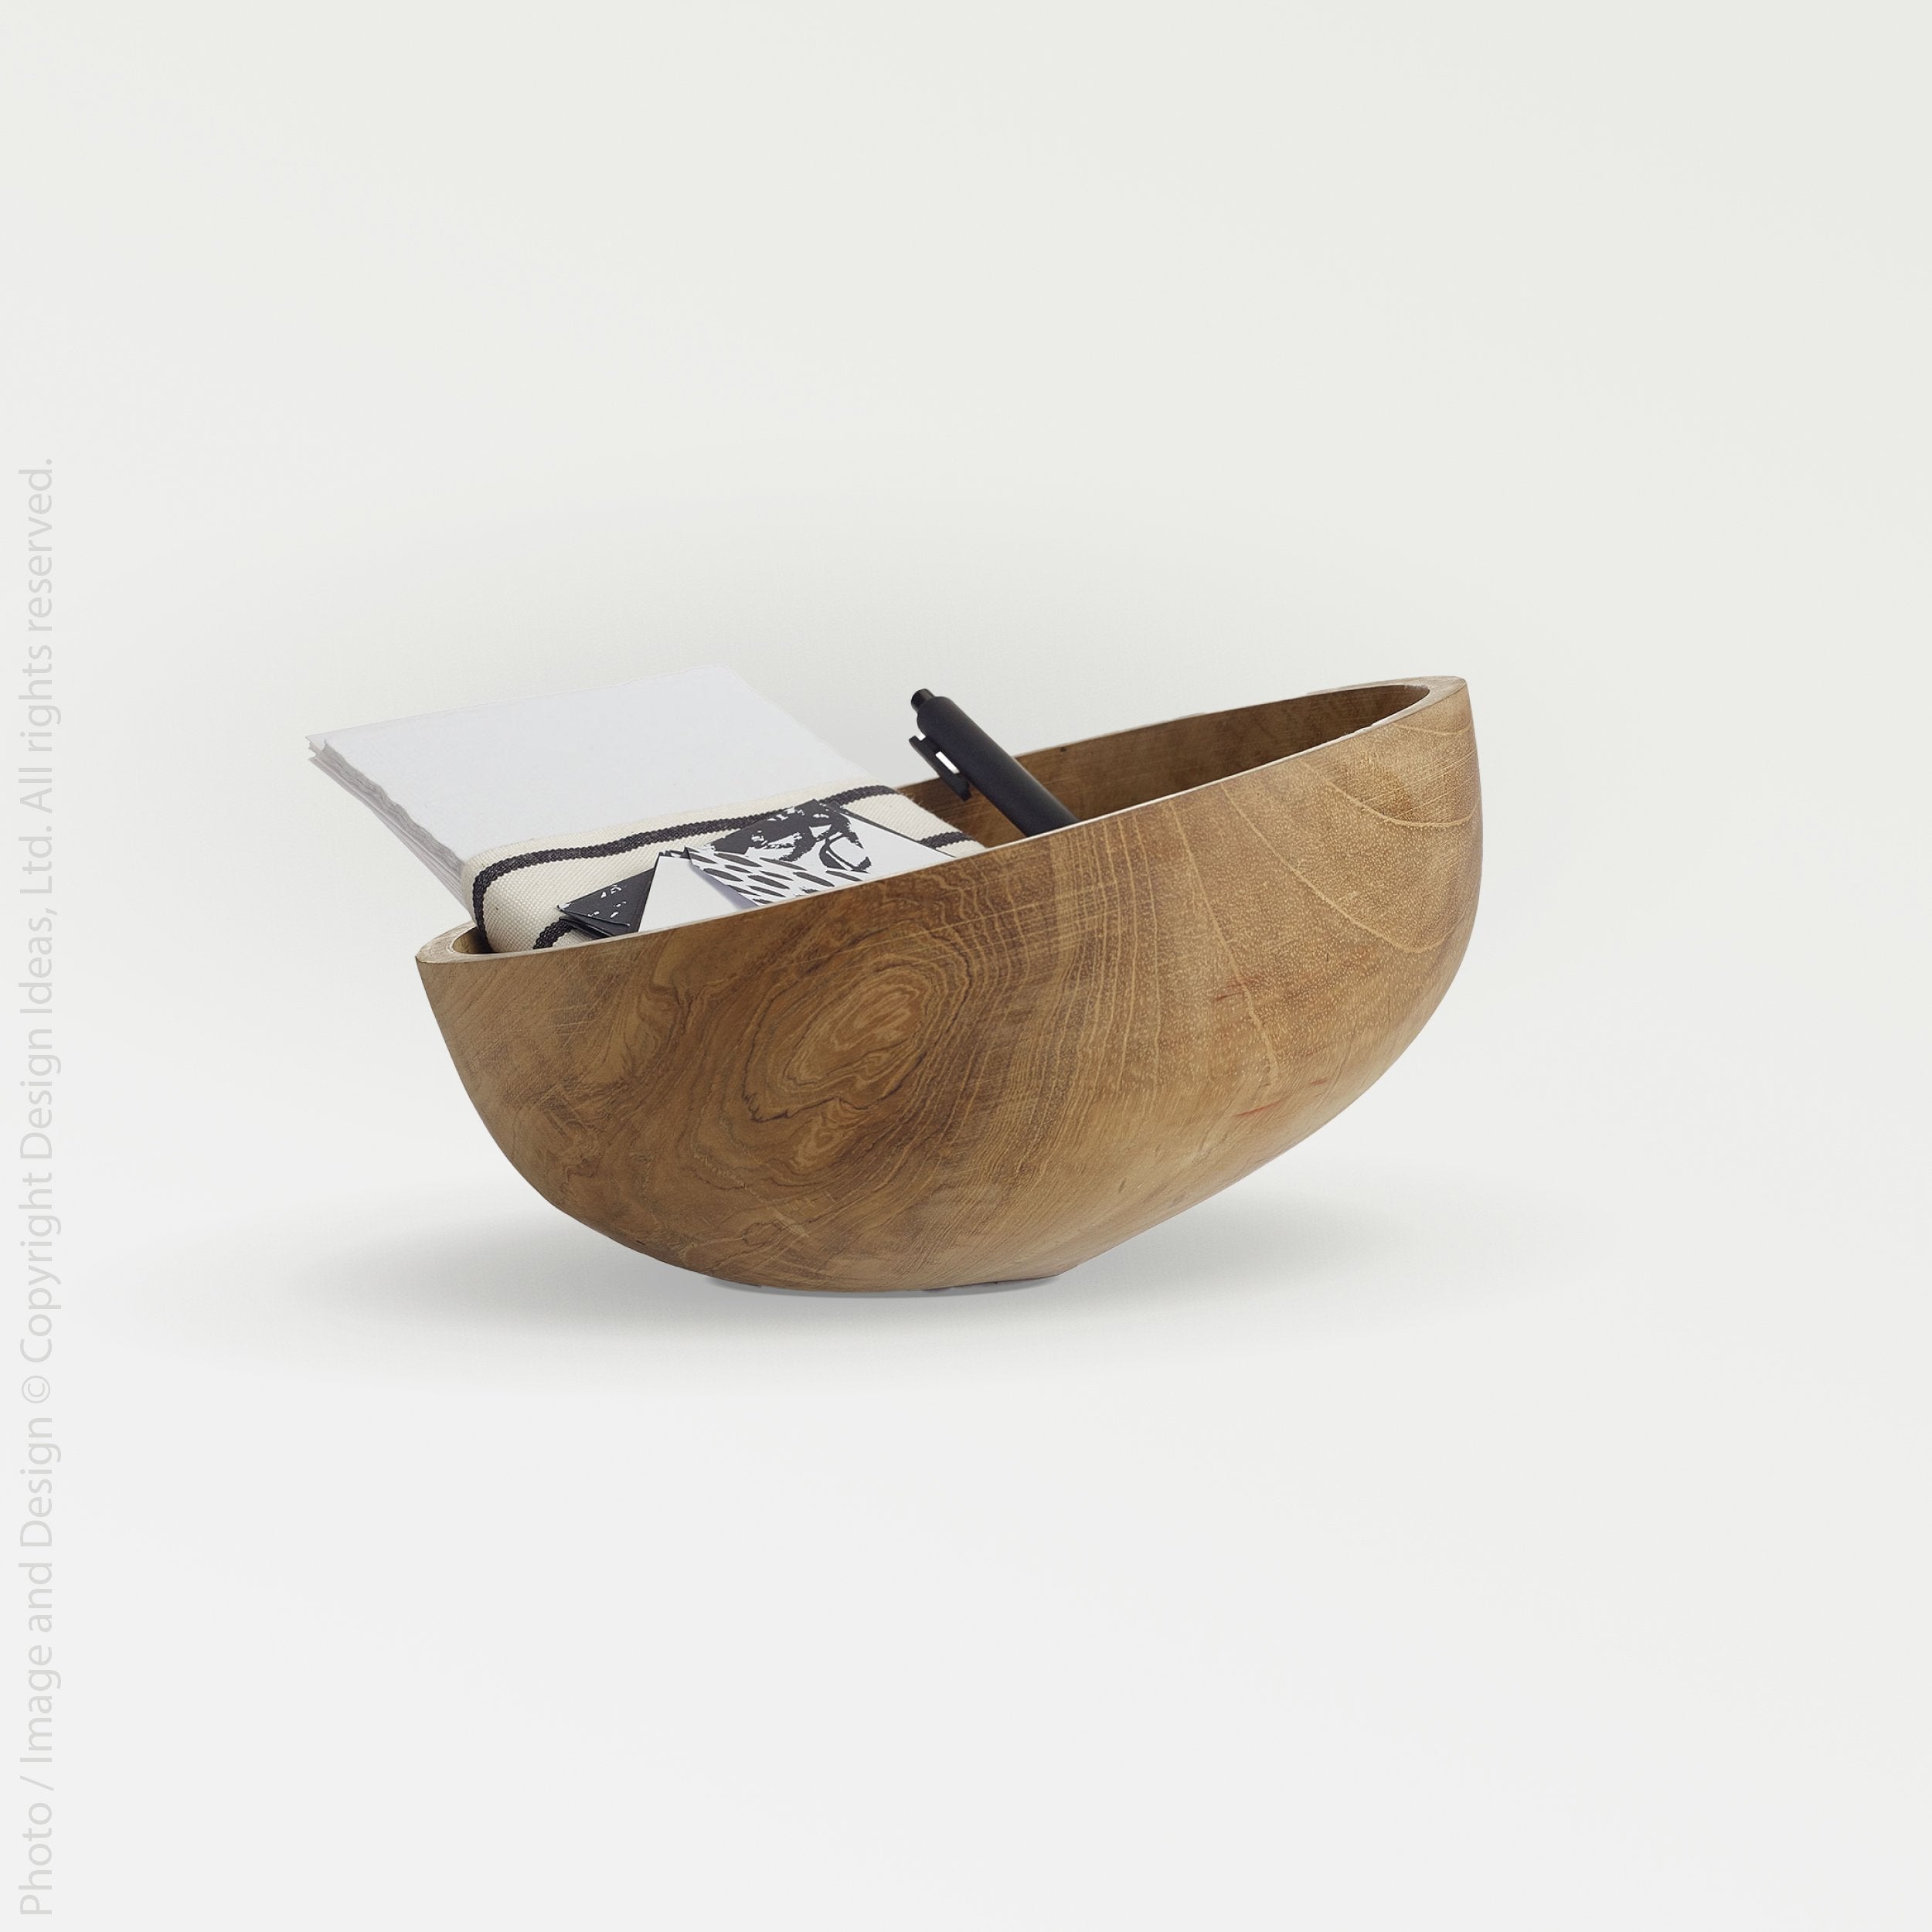 Axis Centerpieces Bowl - Natural Color | Image 1 |  | Exquisitely handmade with natural centerpieces for long lasting use | This bowl is sustainably sourced | Available in natural color | texxture home